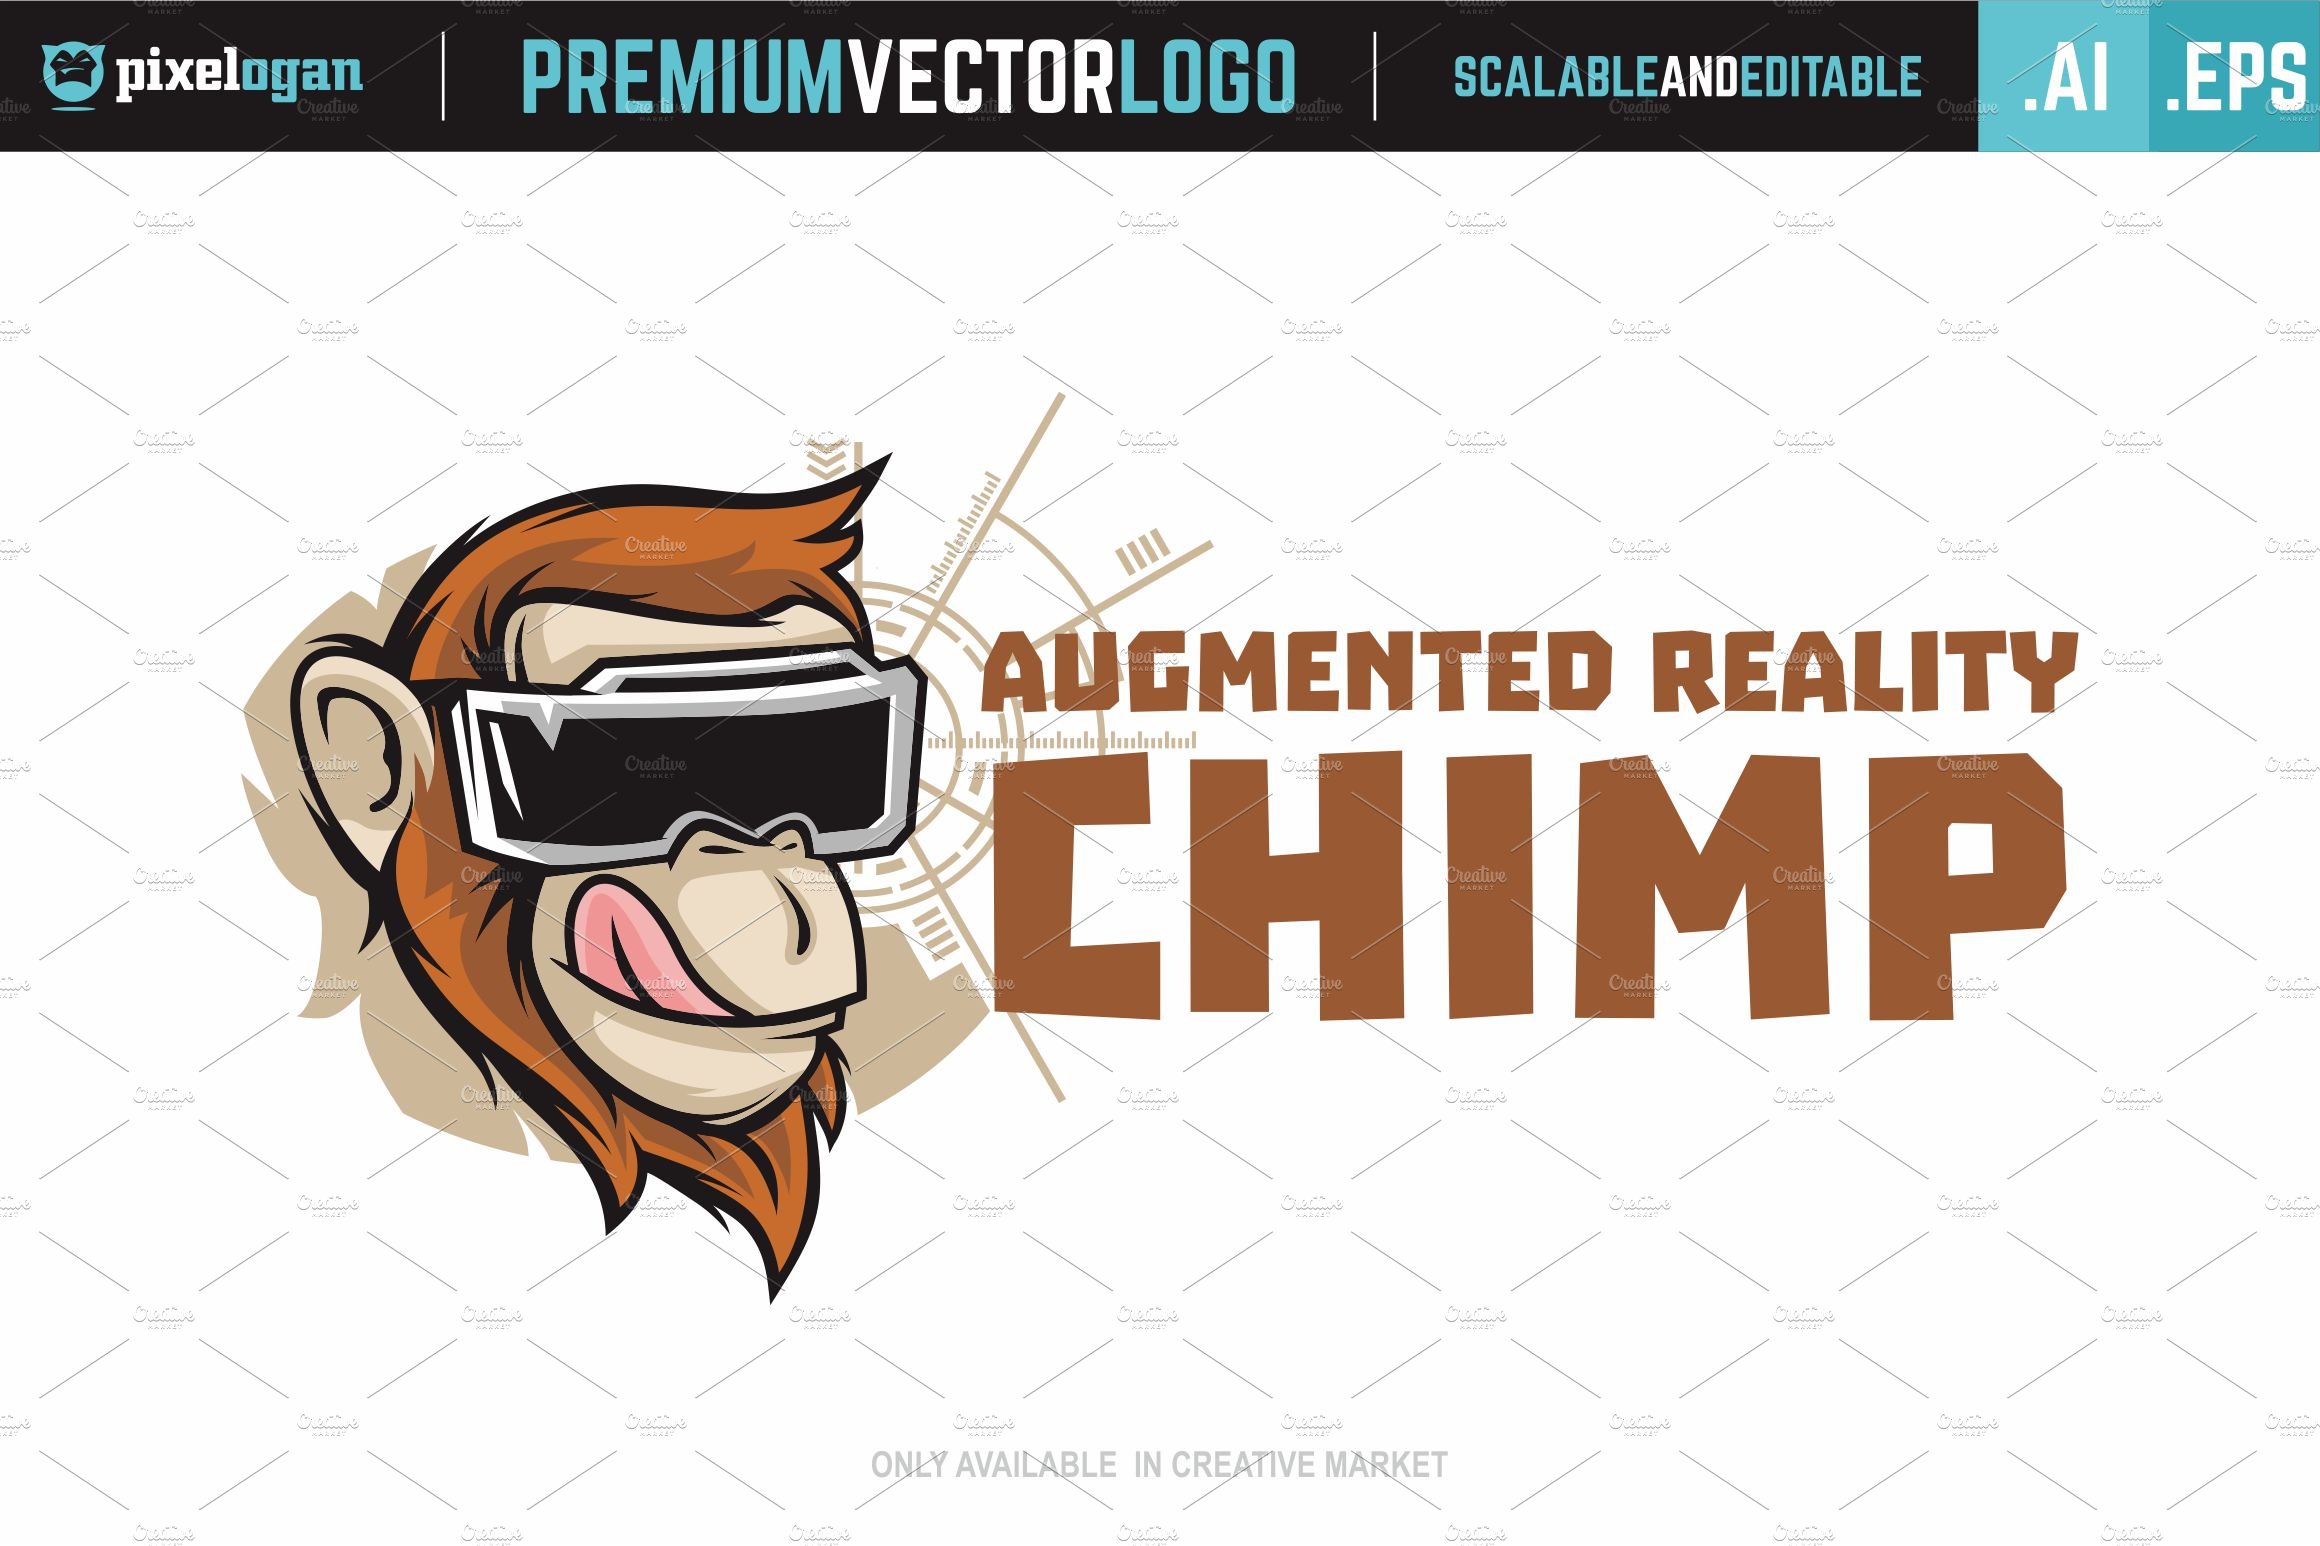 Augmented Reality Chimp Logo cover image.